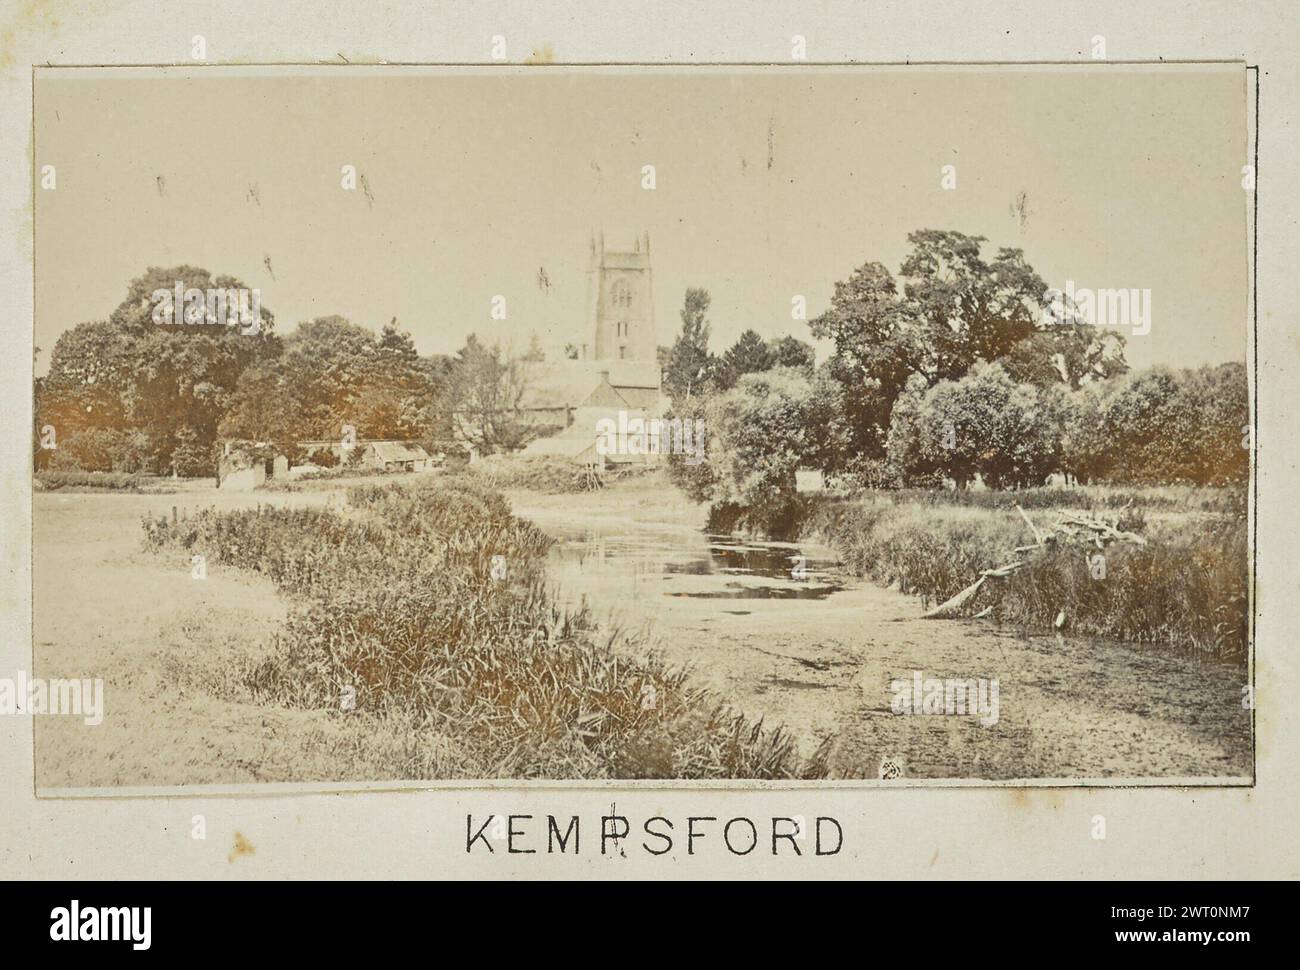 Kempsford. Henry W. Taunt, photographer (British, 1842 - 1922) 1897 One of three tipped-in photographs illustrating a printed map of Castle Eaton, Kempsford, and the surrounding area along the River Thames. The photograph shows a view of the river at Kempsford with St. Mary's Church and the surrounding buildings visible across a field in the distance. (Recto, mount) lower center, below image, printed in black ink: 'KEMPSFORD' Stock Photo